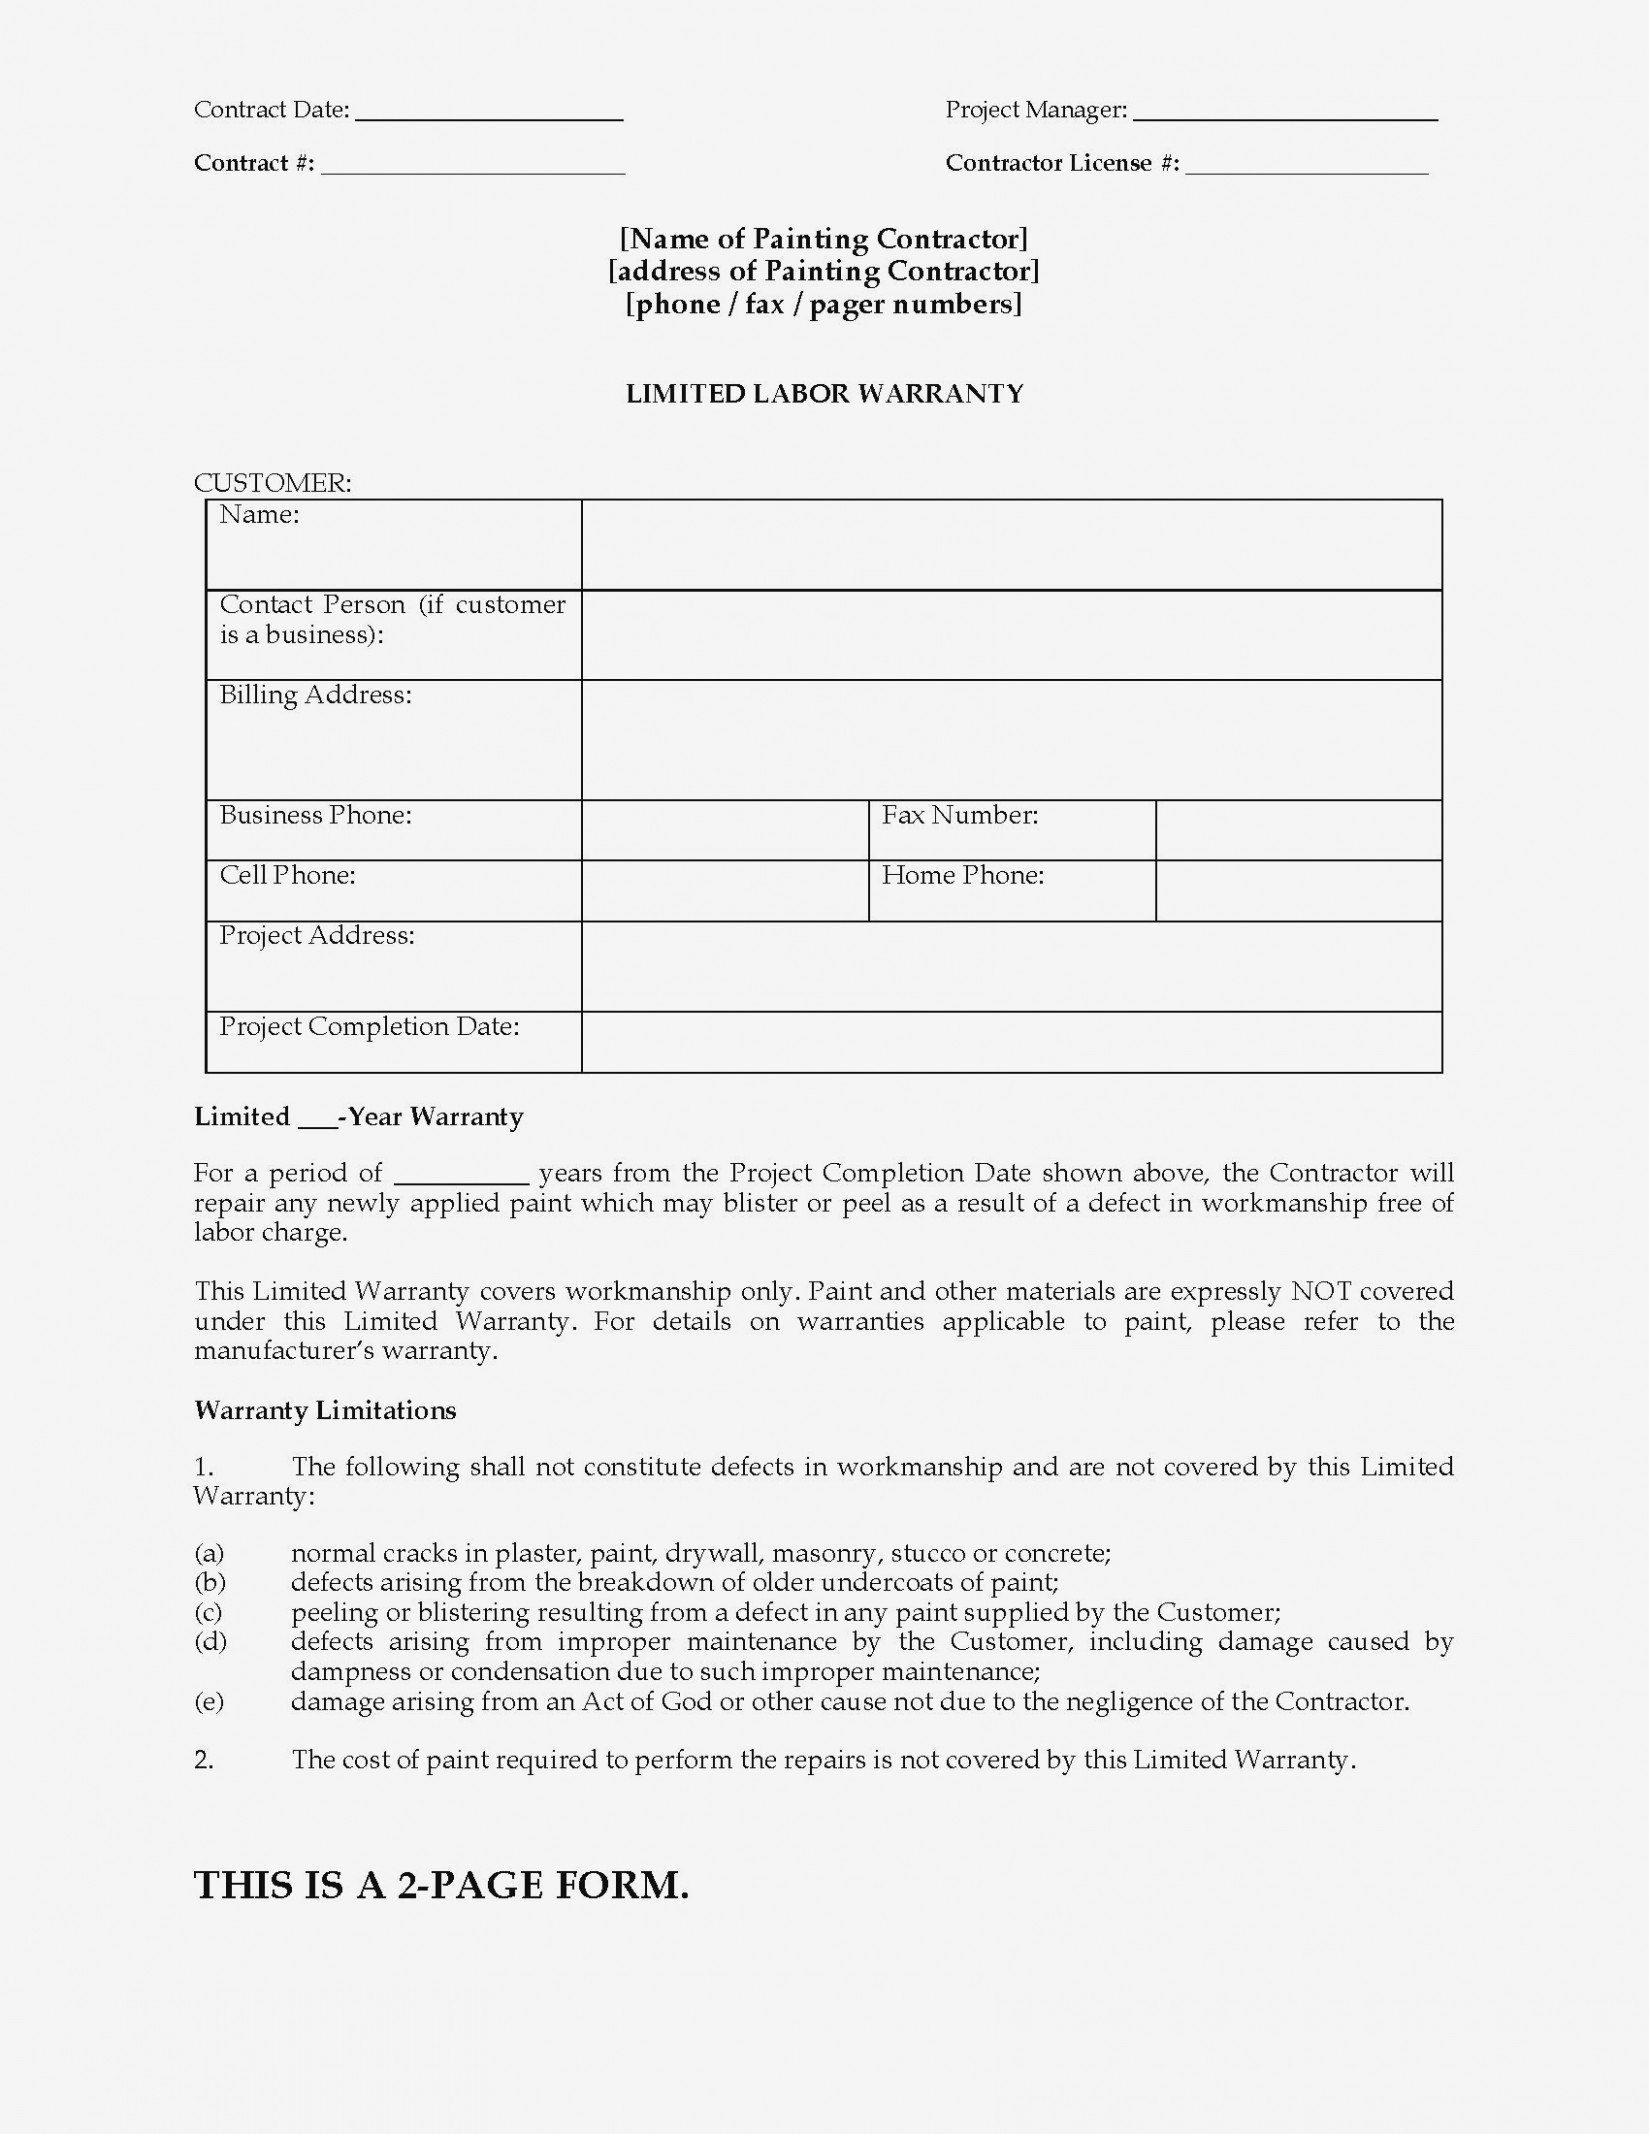 Construction Joint Check Agreement Form Elegant Painting Limited pertaining to Joint Check Agreement Template